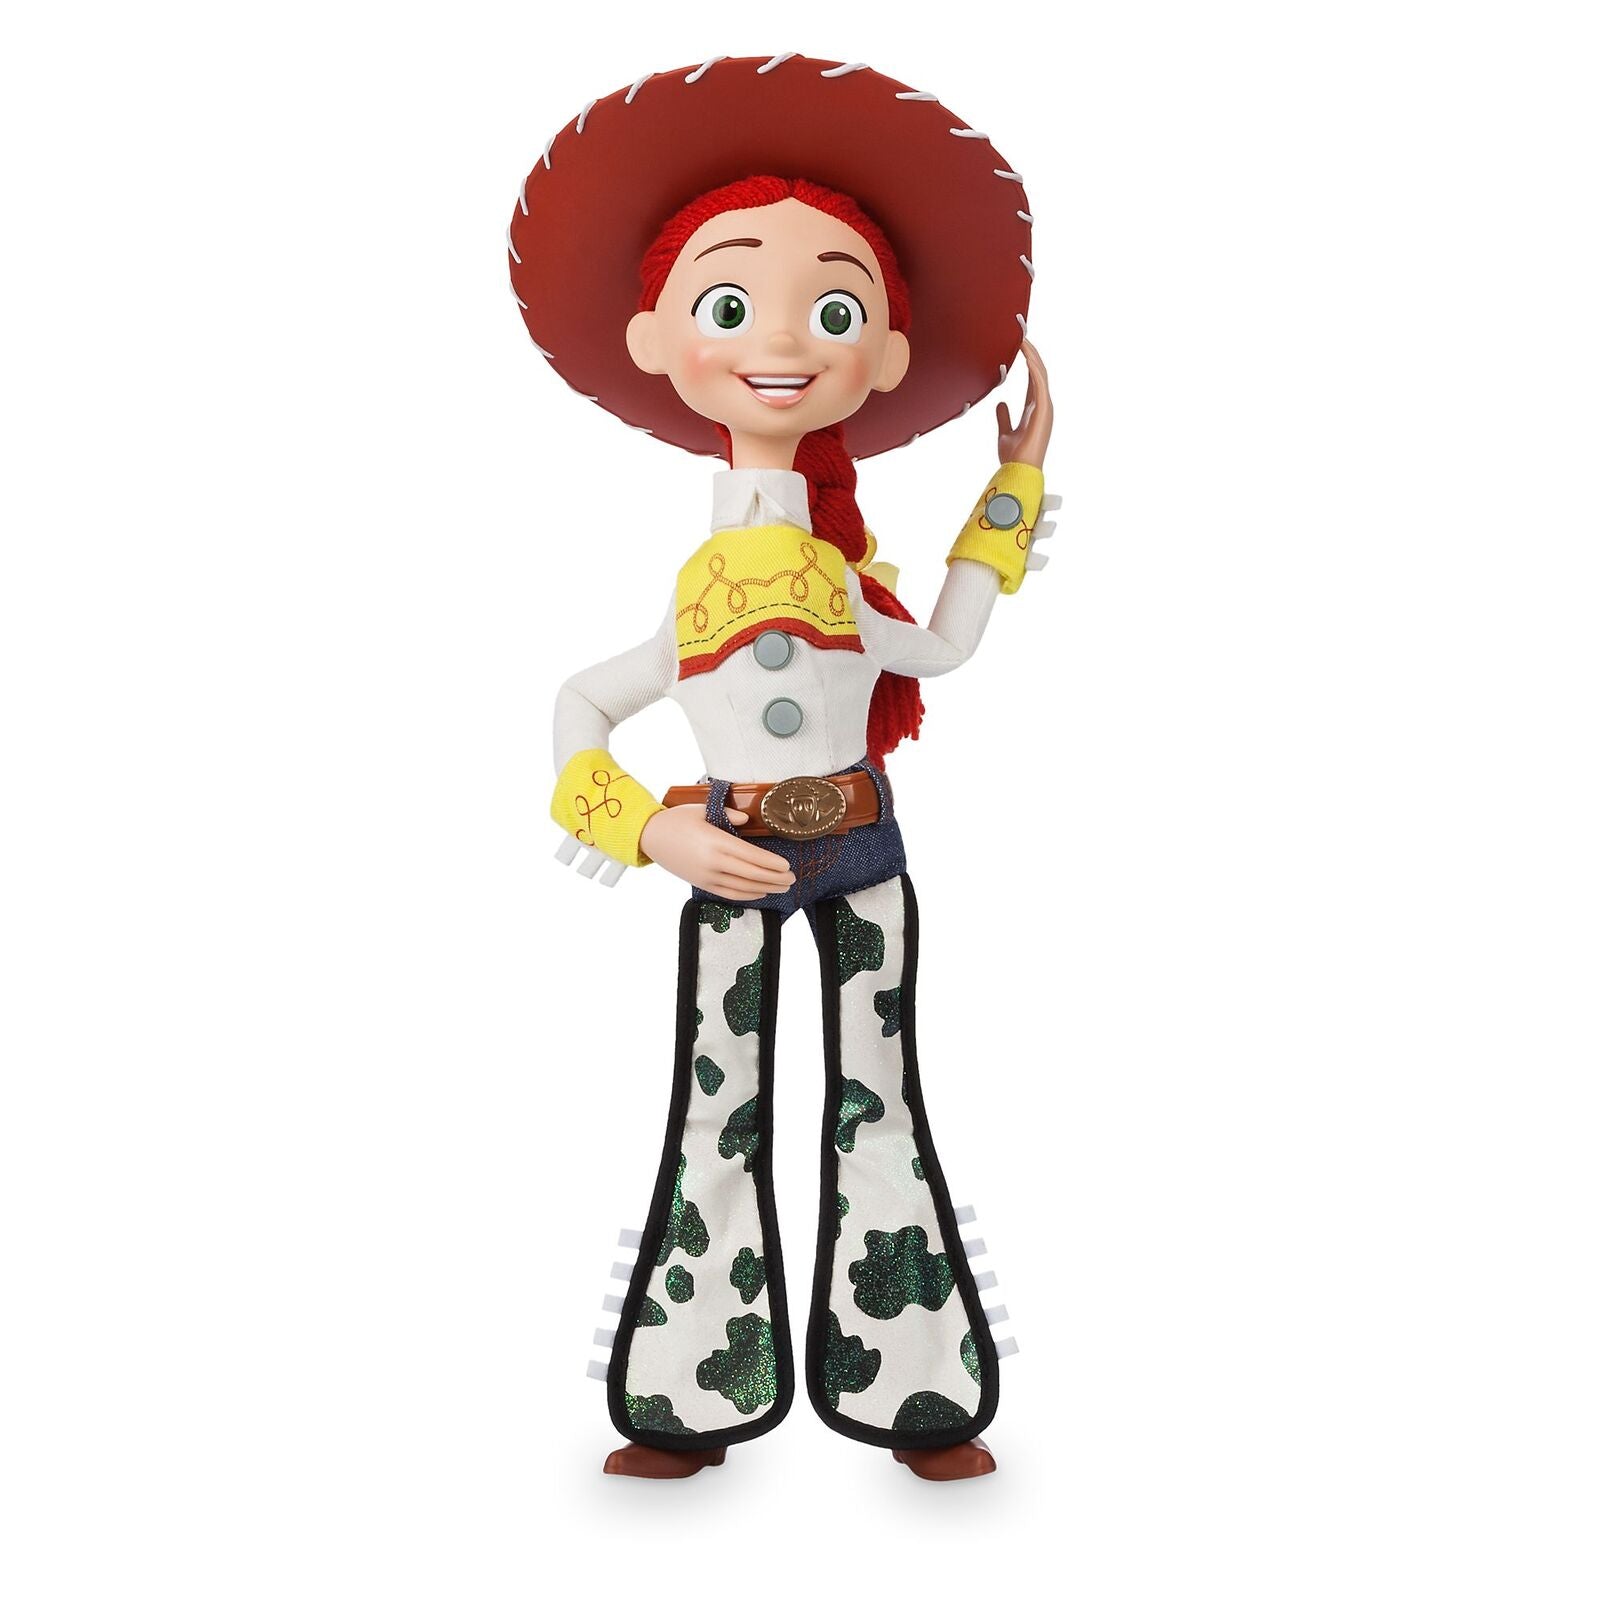 Toy Story Talking Interactive Action Figure - Jessie